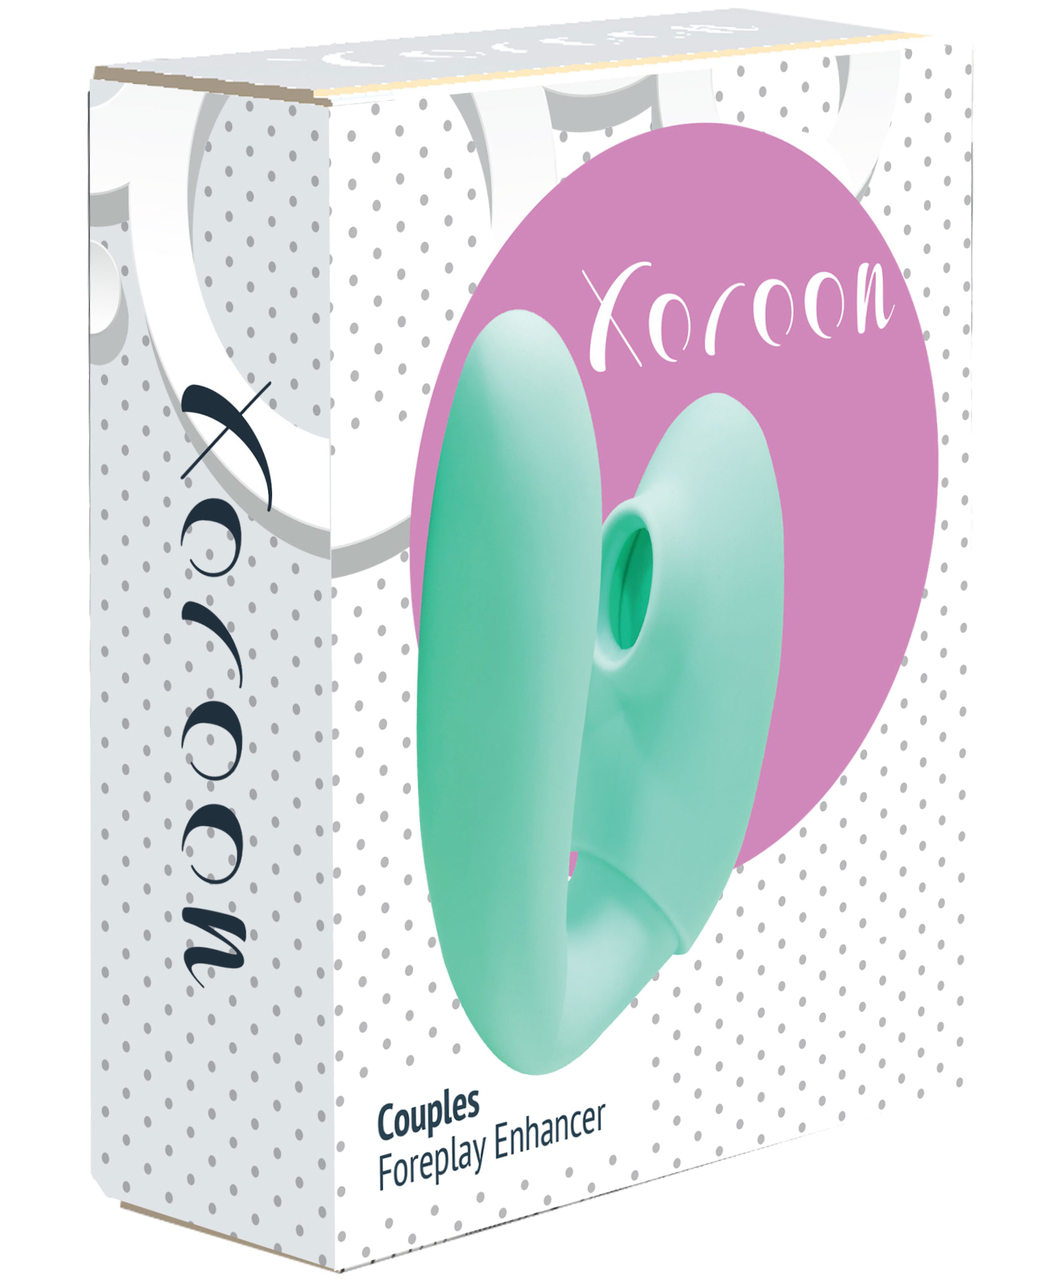 Xocoon Couples Foreplay Enhancer